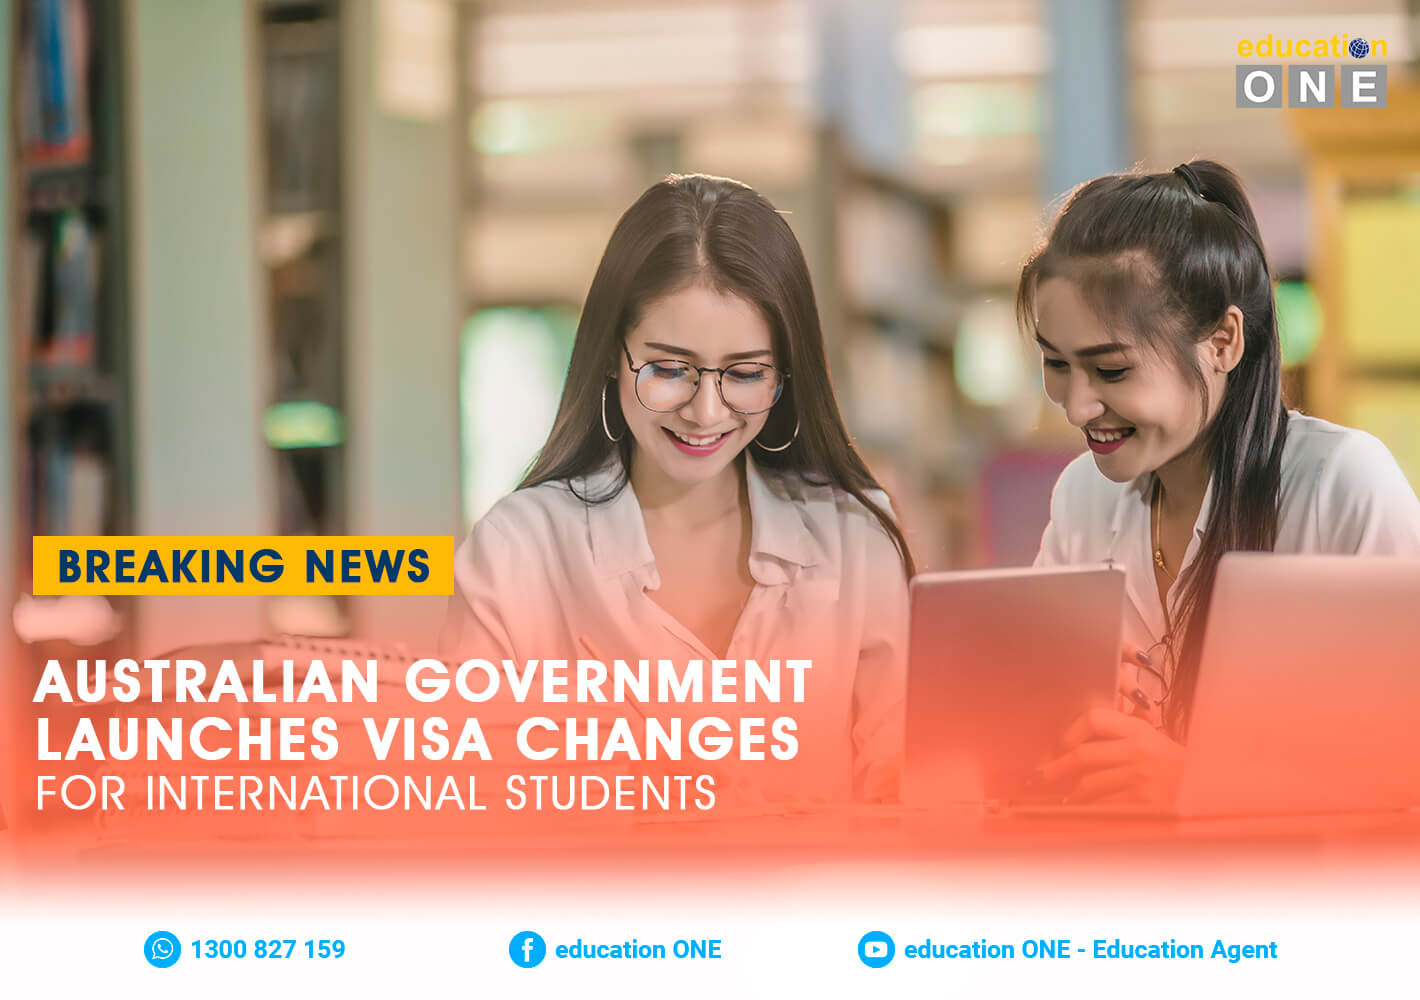 Australian Government Launches Visa Changes for International Students